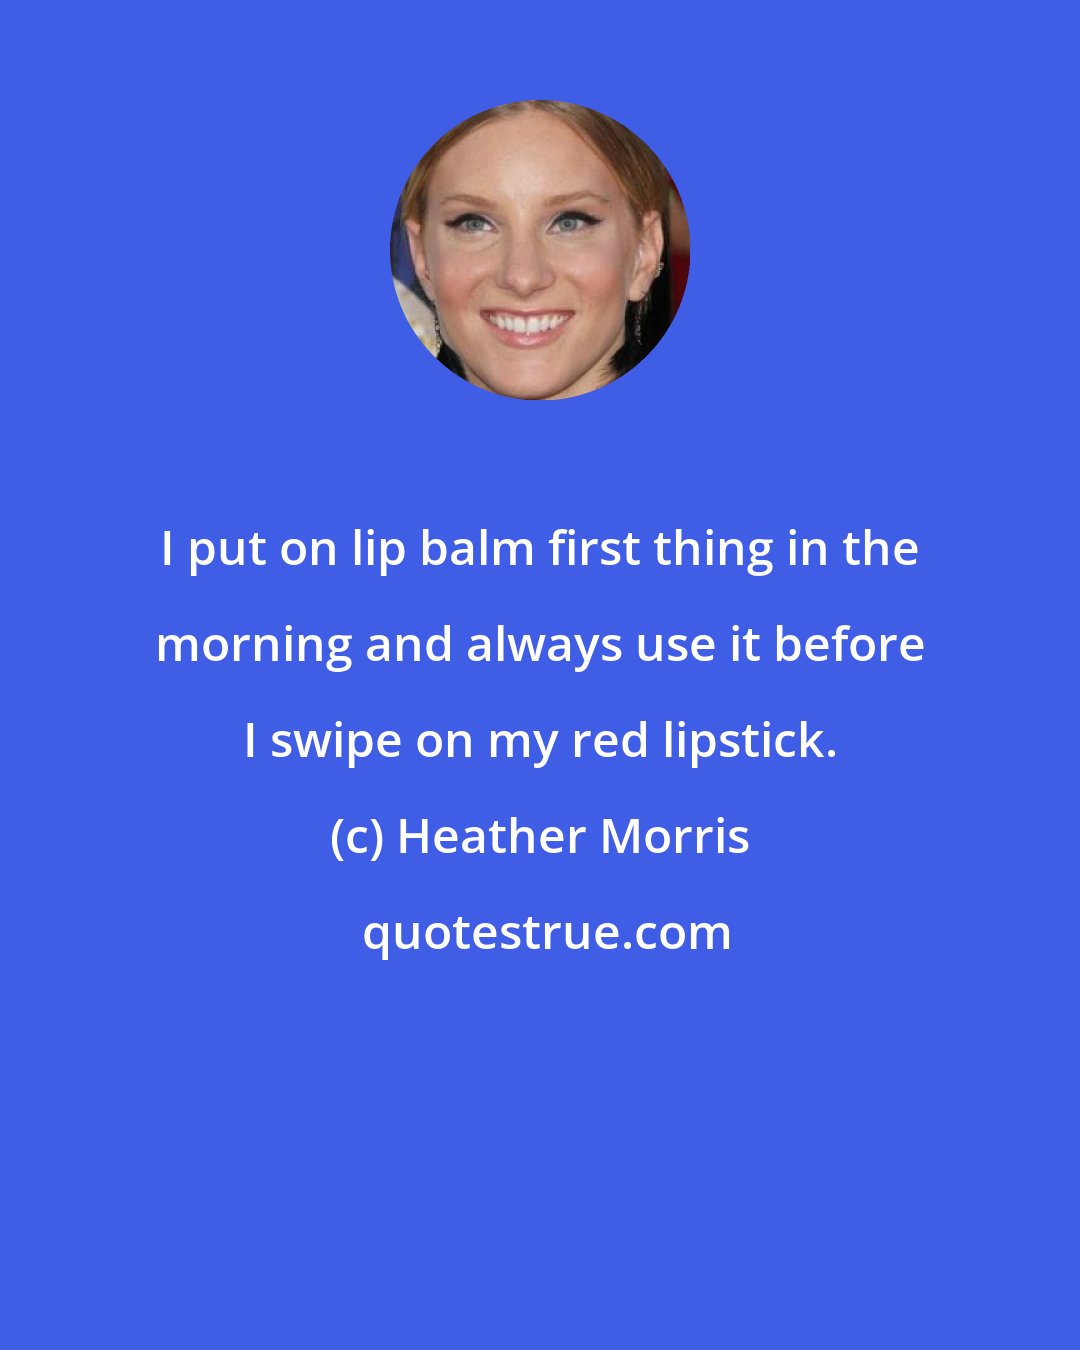 Heather Morris: I put on lip balm first thing in the morning and always use it before I swipe on my red lipstick.